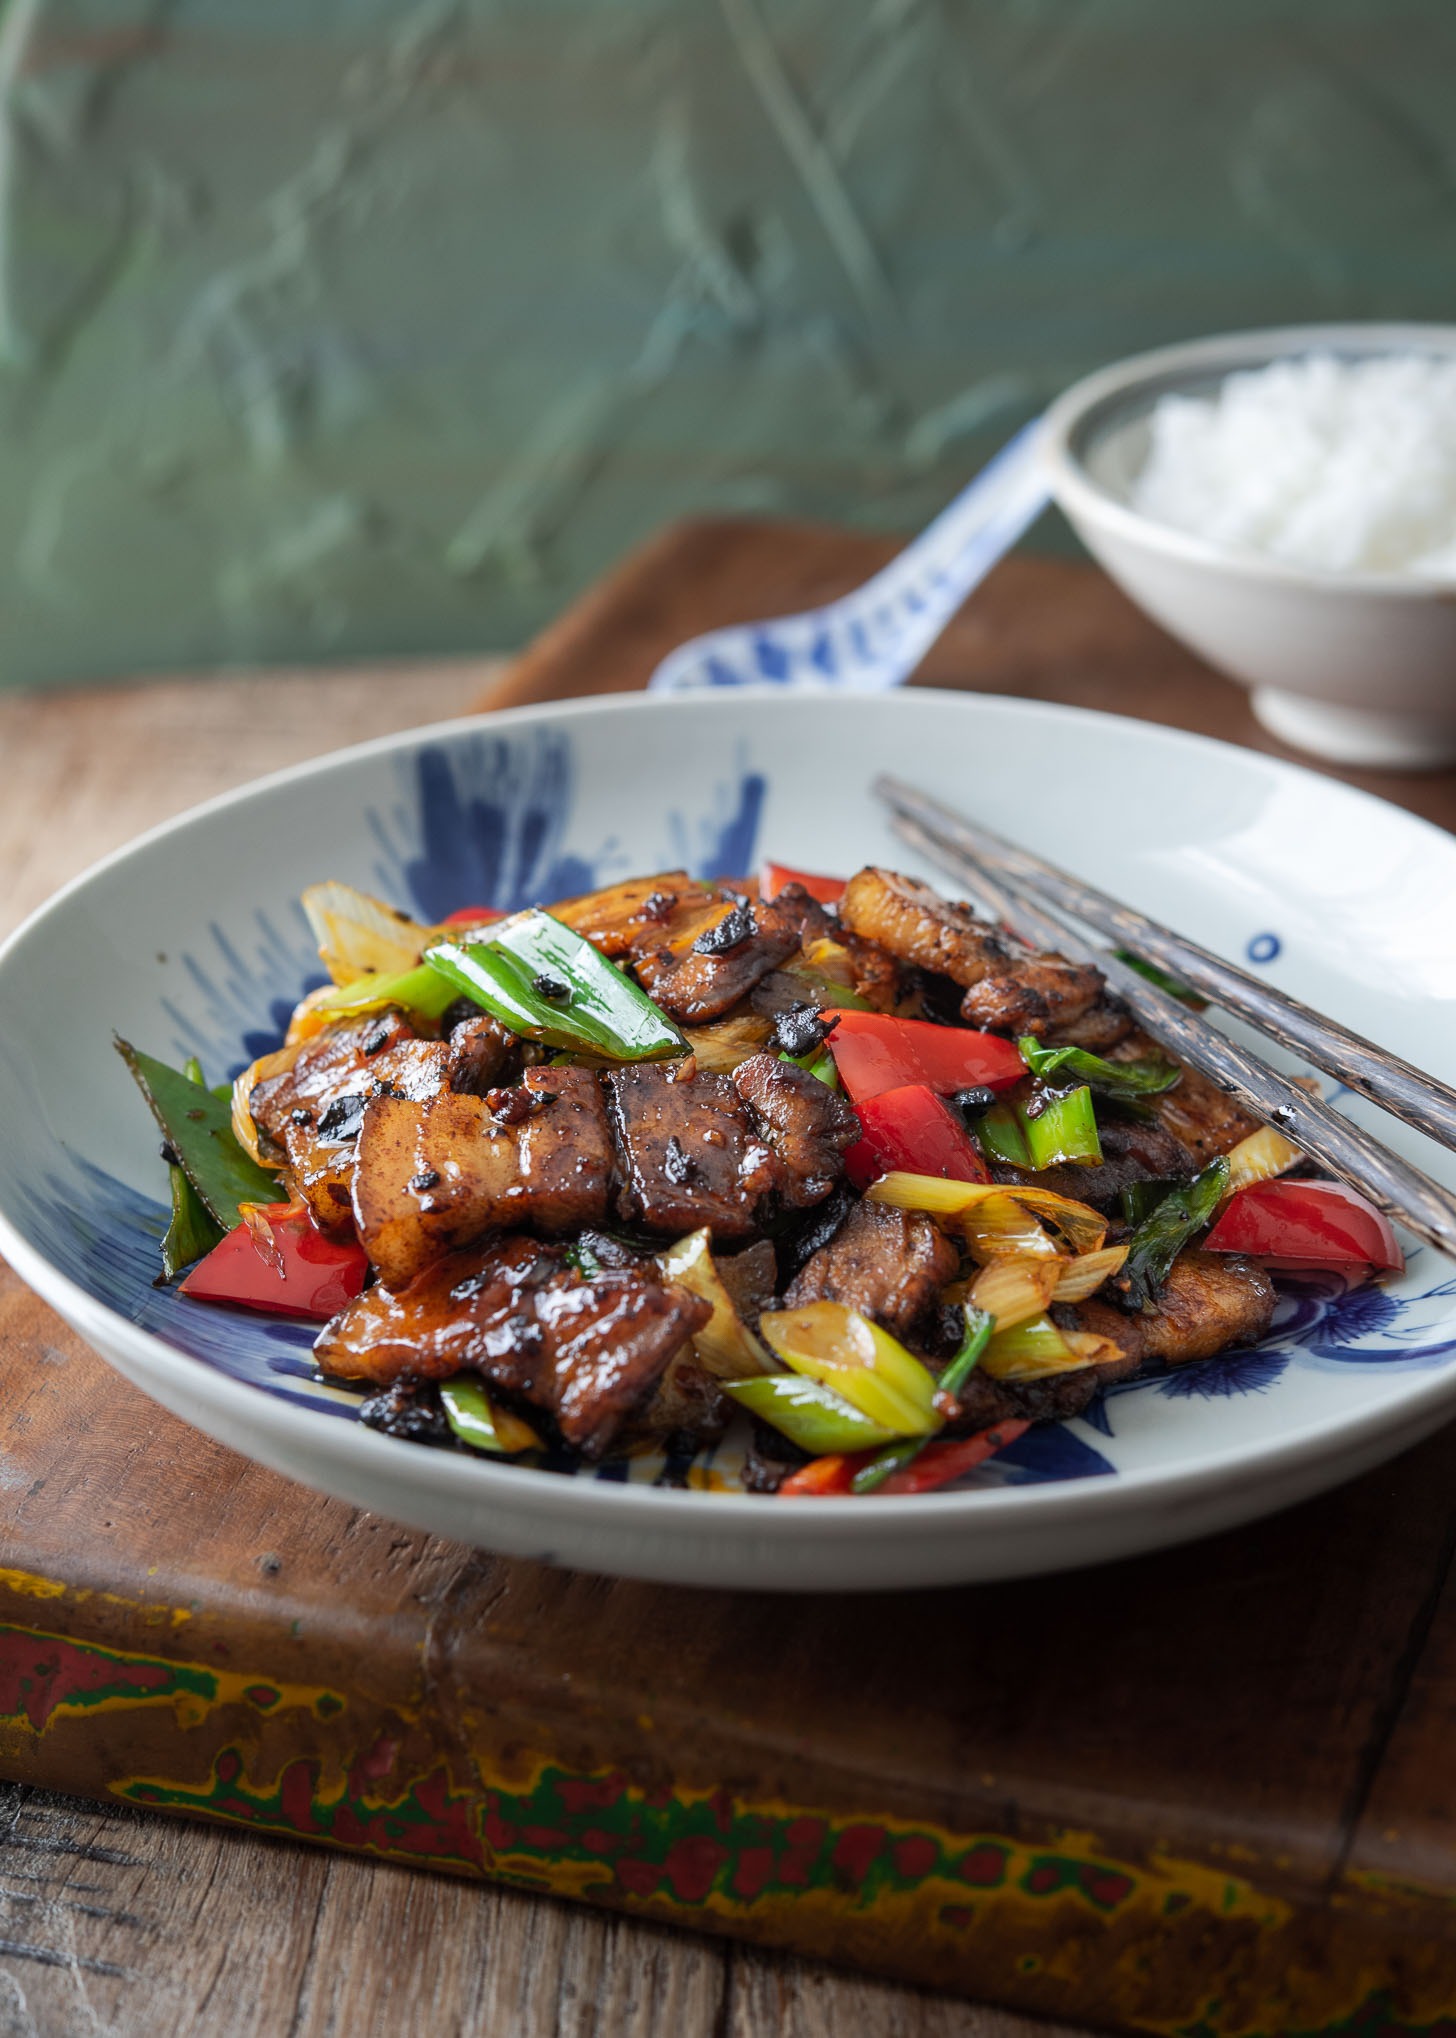 Chinese twice cooked pork (Sichuan pork stir-fry) presented on a serving dish.